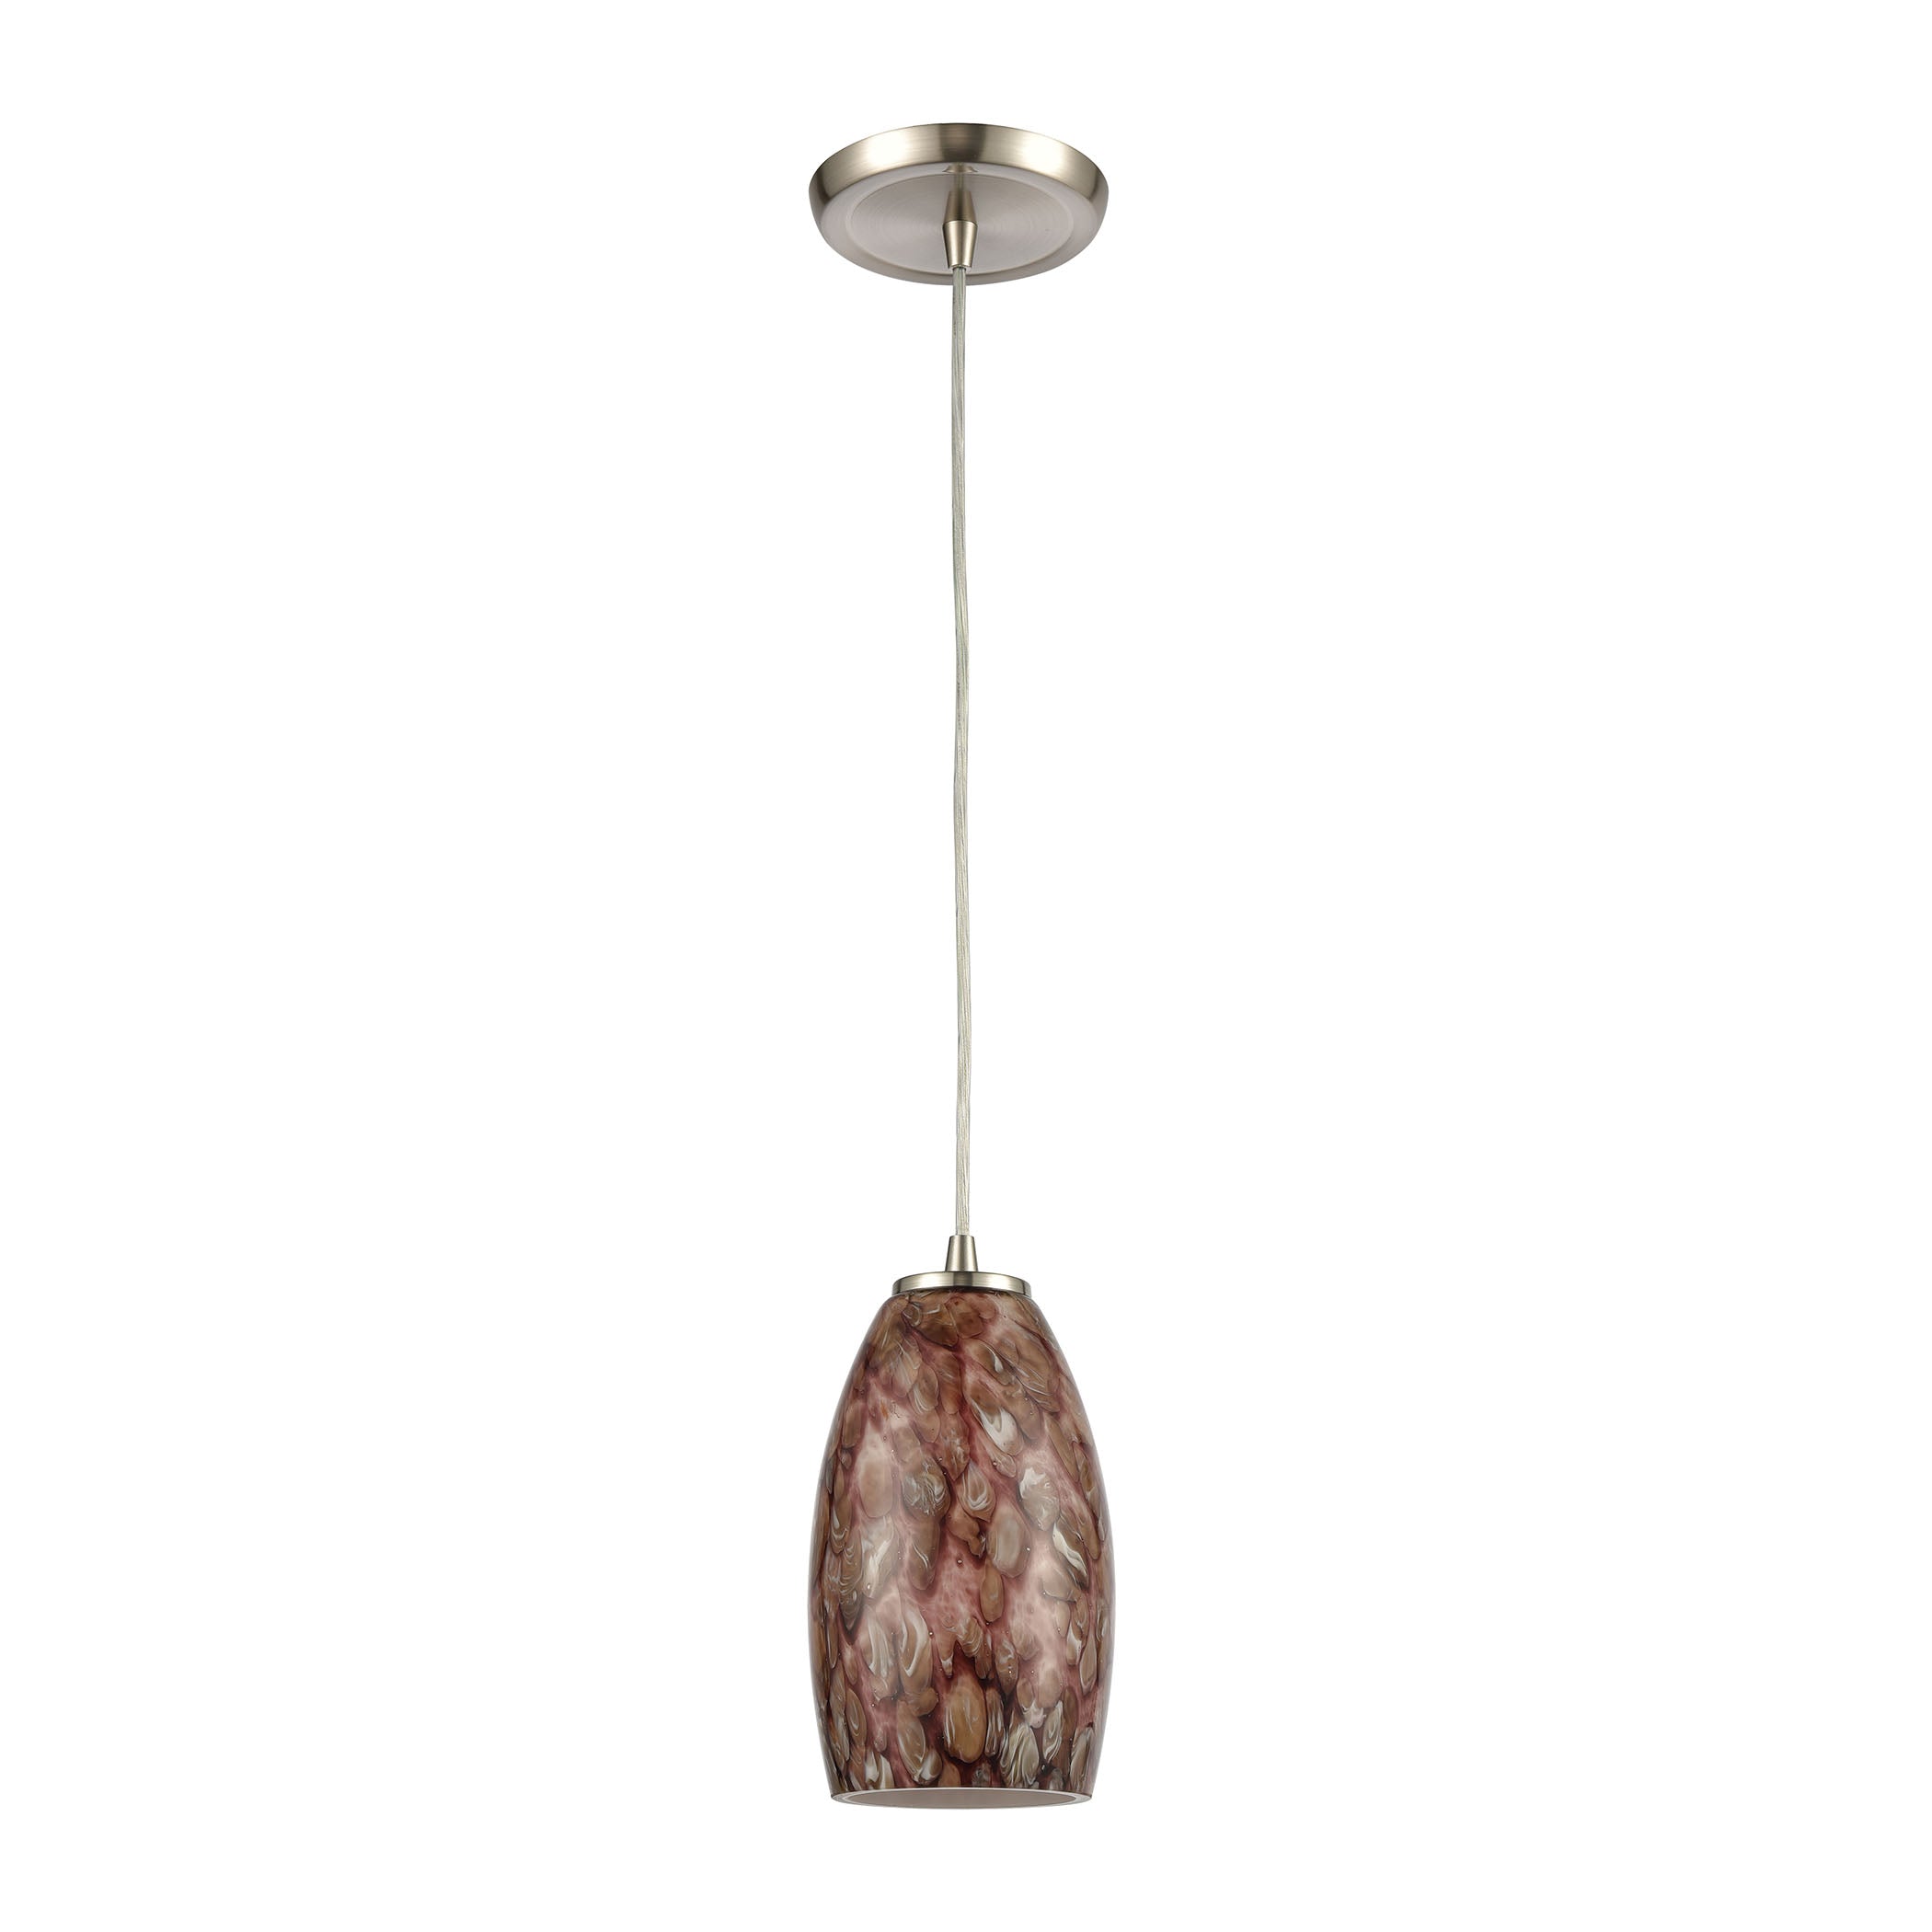 ELK Lighting 60216/1 Nature's Collage 1-Light Mini Pendant in Satin Nickel with Feathered Brown and Red-Toned Glass